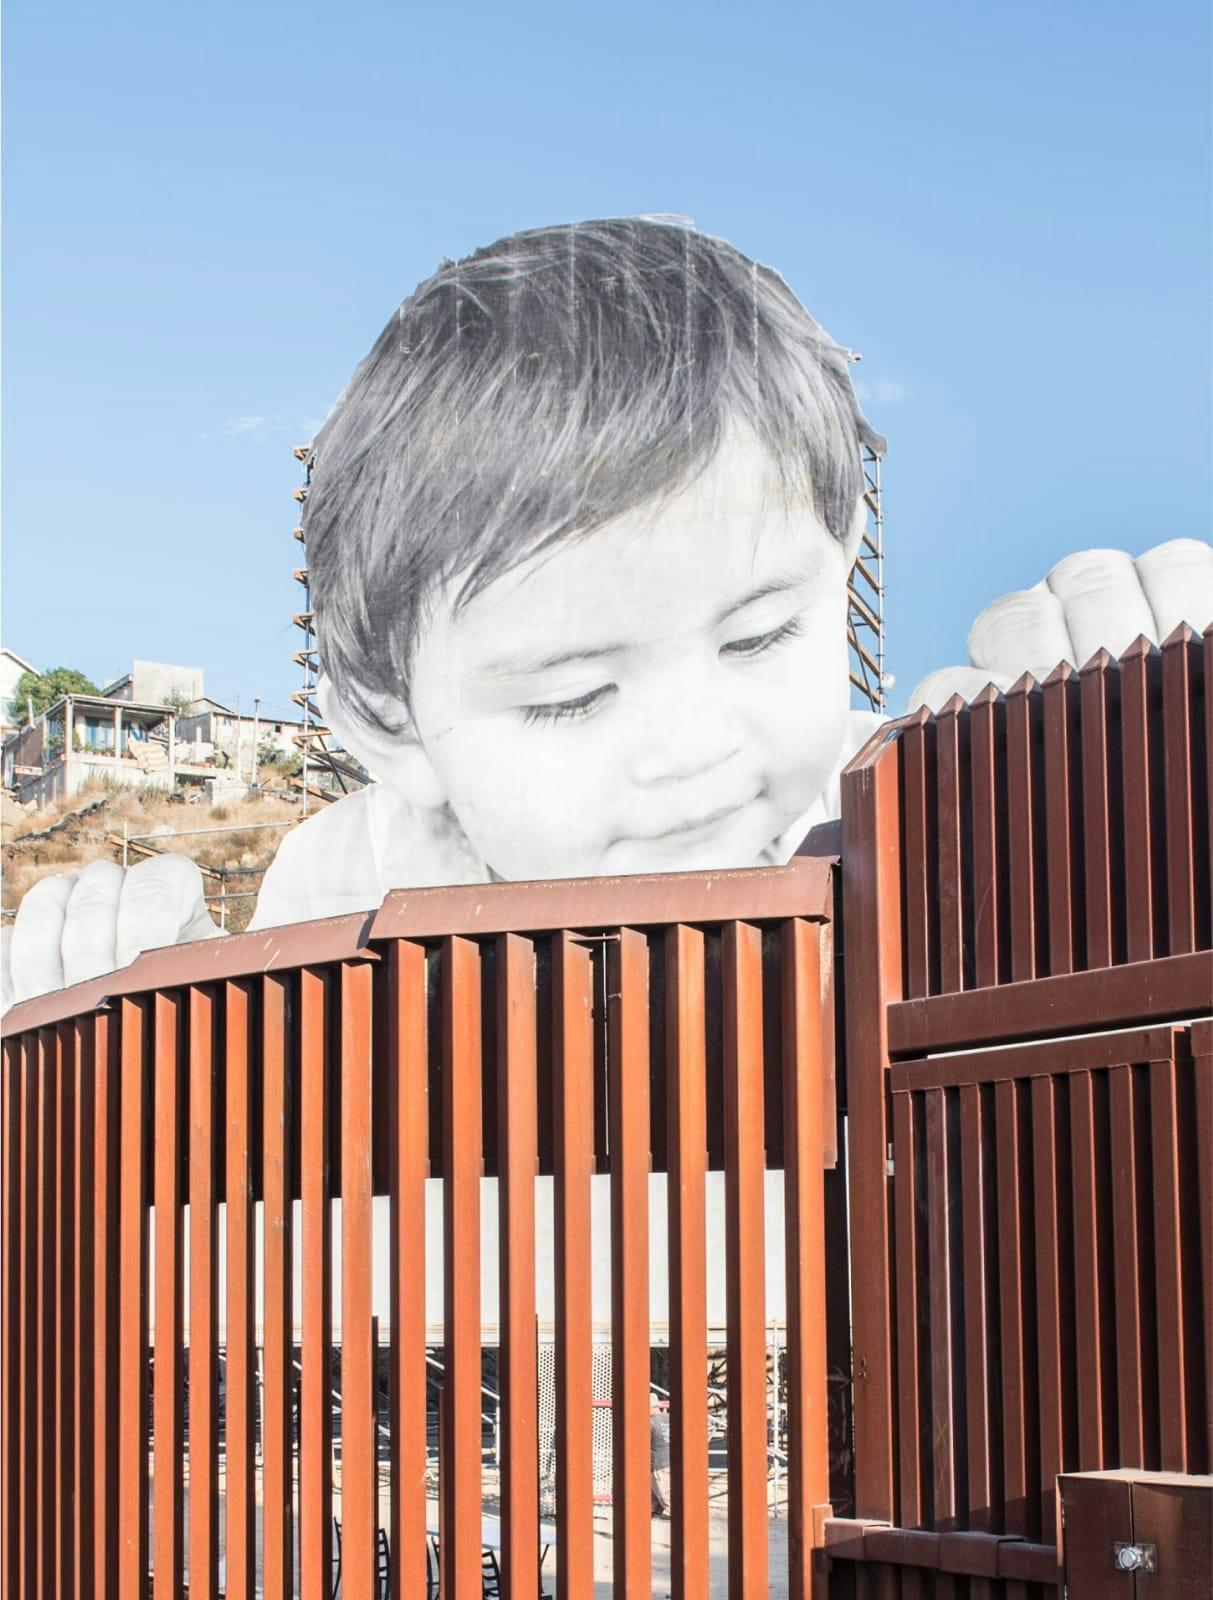 Image of a border wall with a mural of a large sized child looking over it